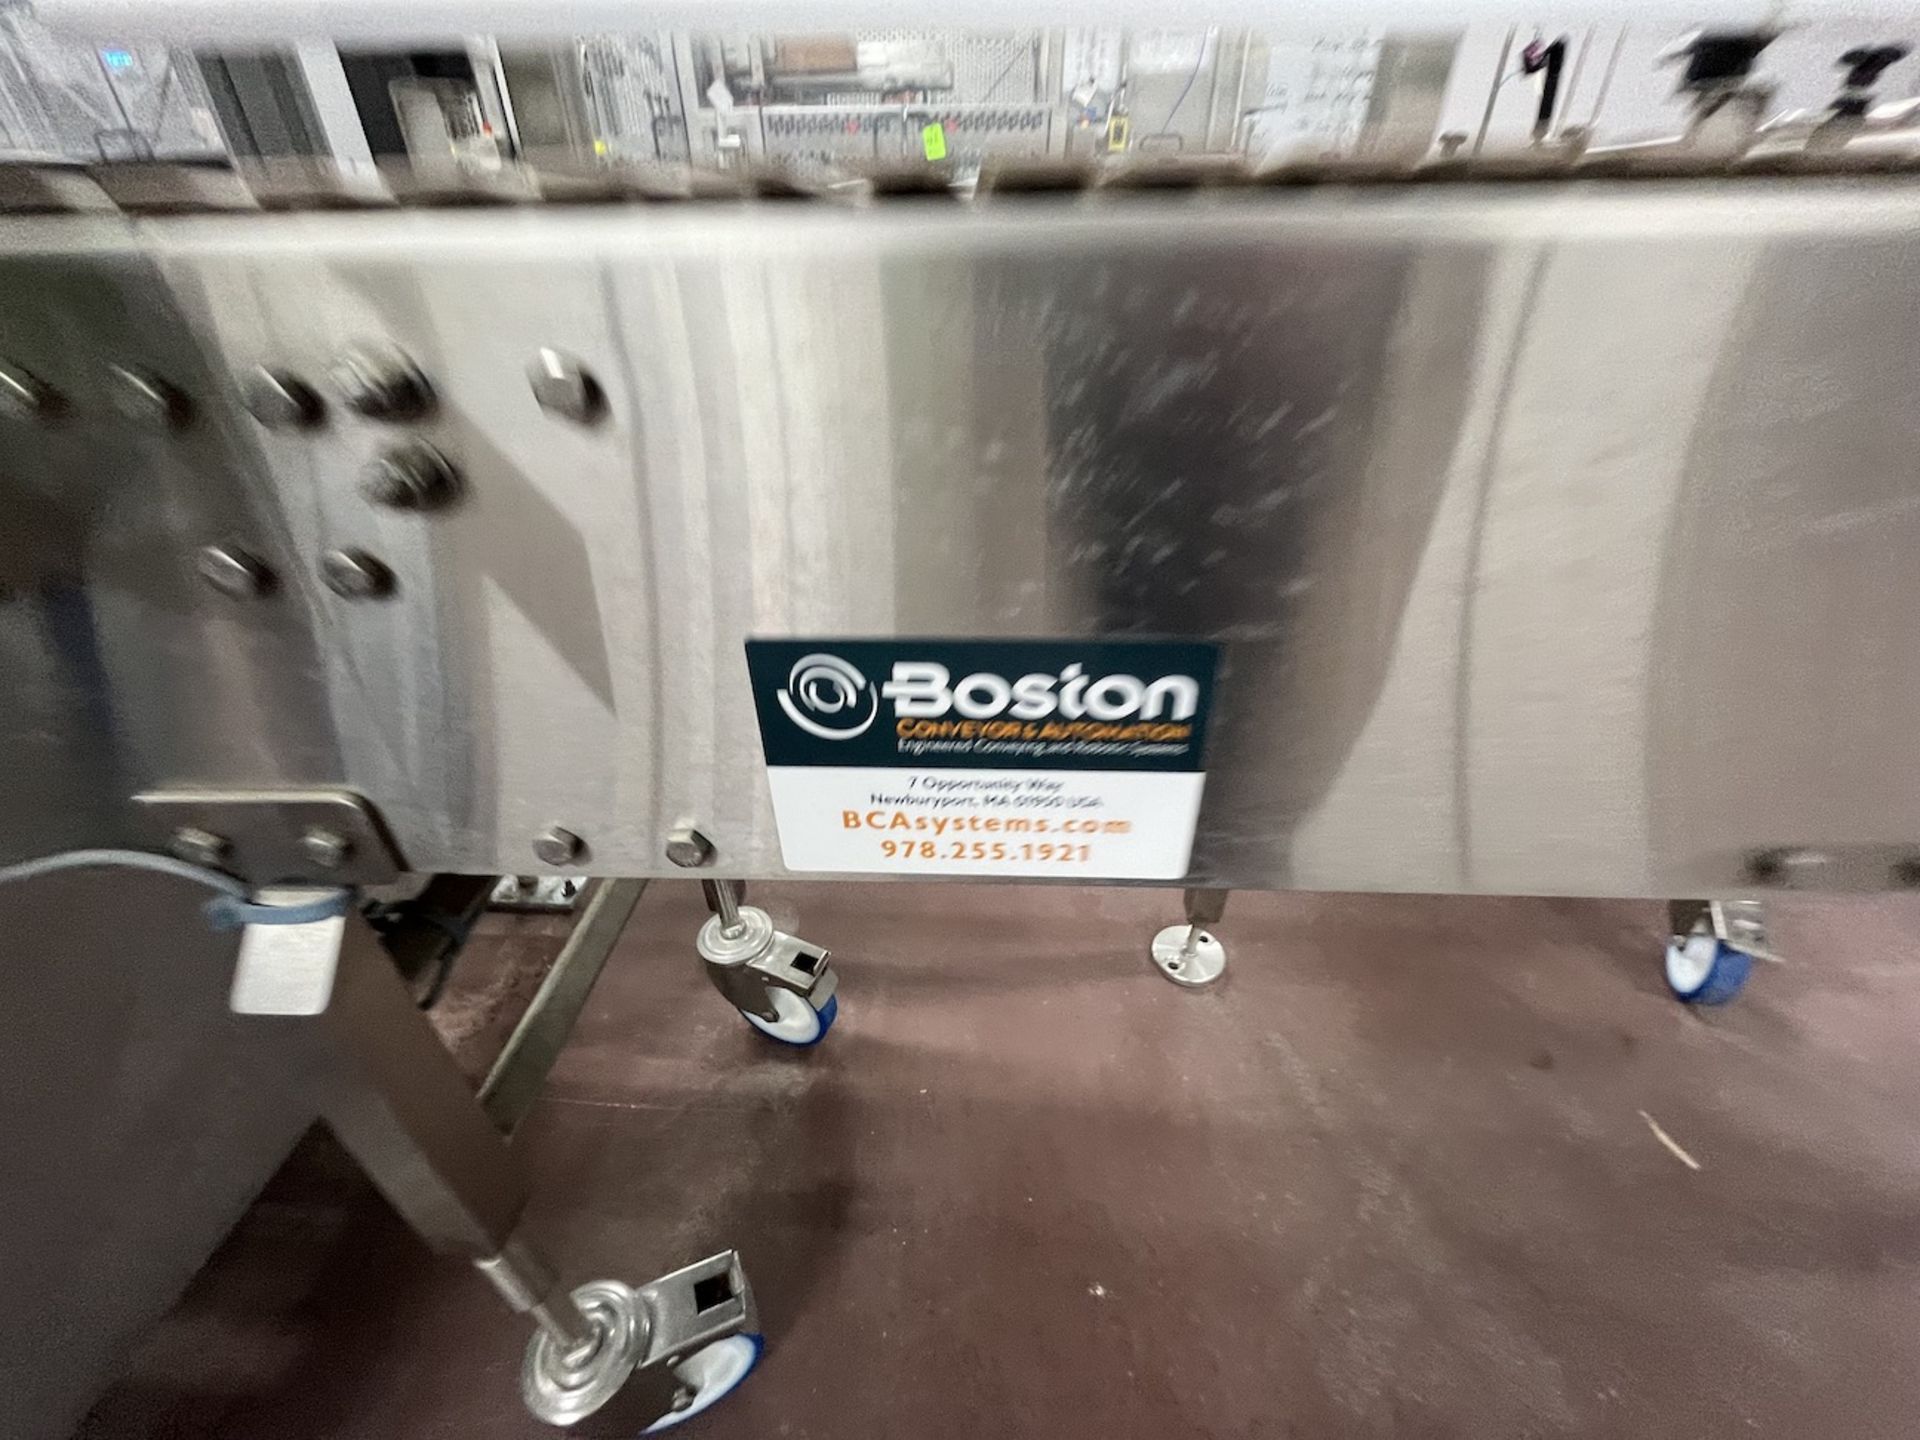 BOSTON CONVEYOR AND AUTOMATION CORP PRODUCT CONVEYOR, APPROX. 300 IN. L X 12 IN. W - Image 7 of 8